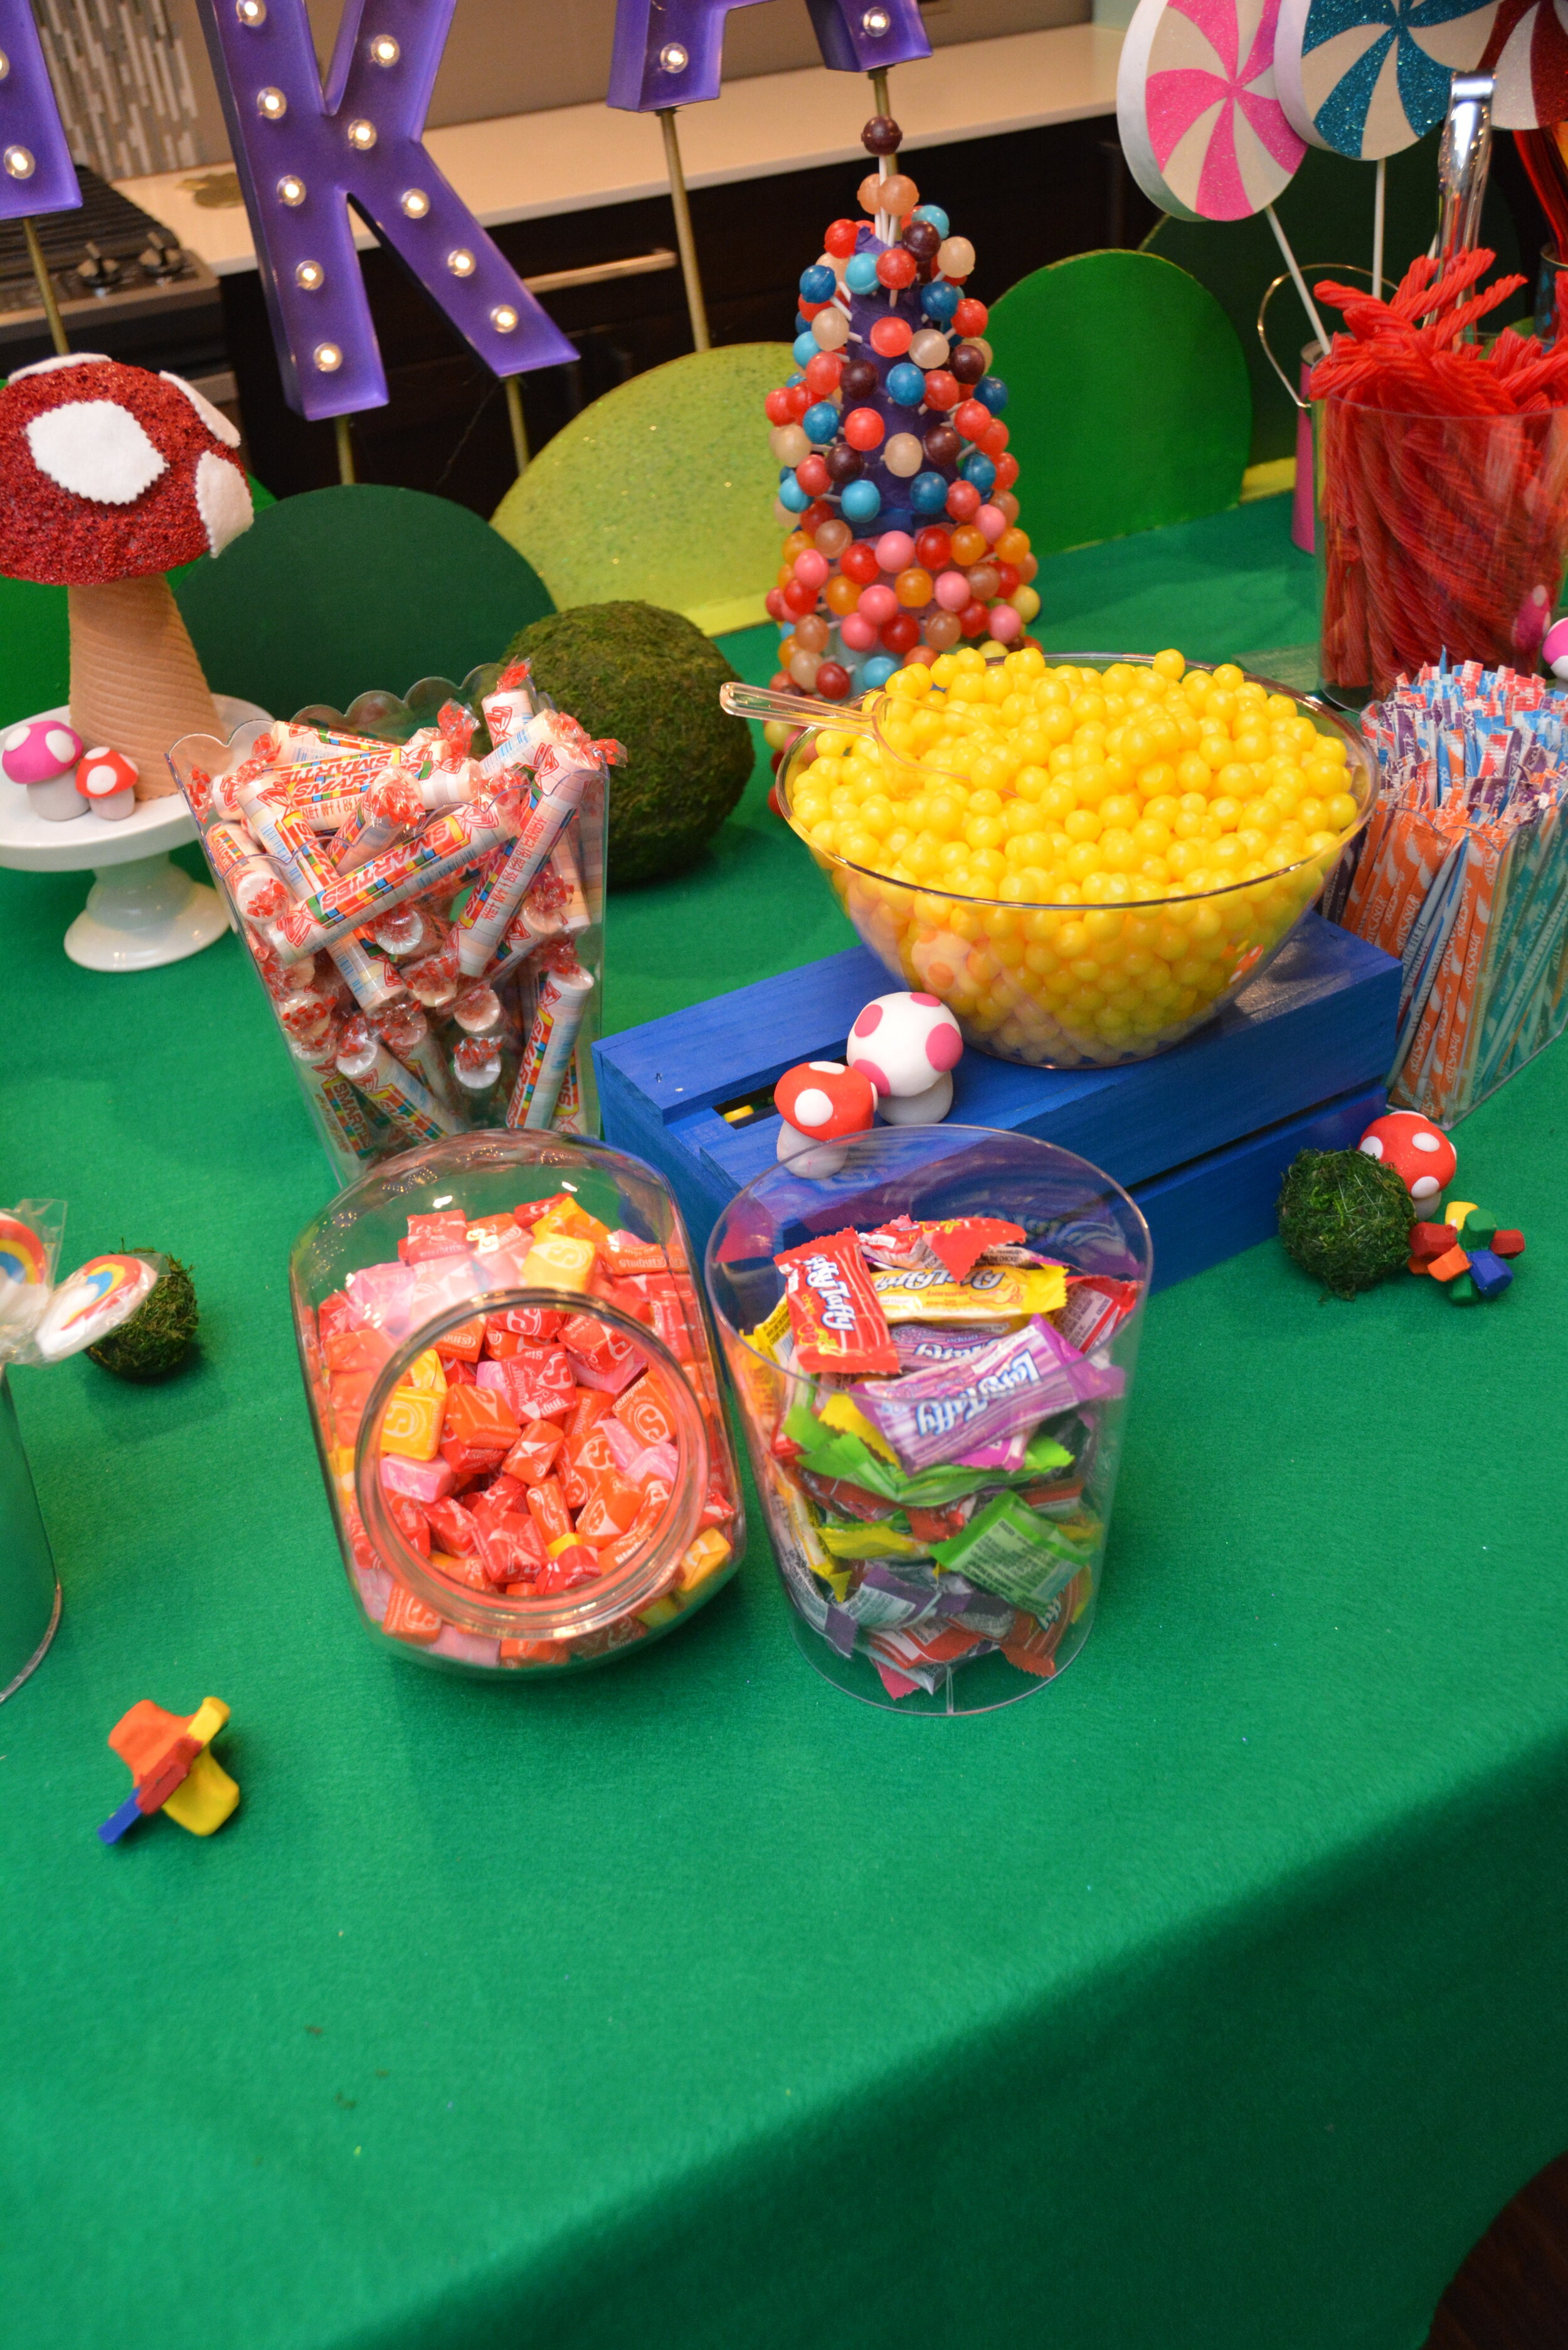 How to Throw A Candy Making Party - Fun Party Ideas